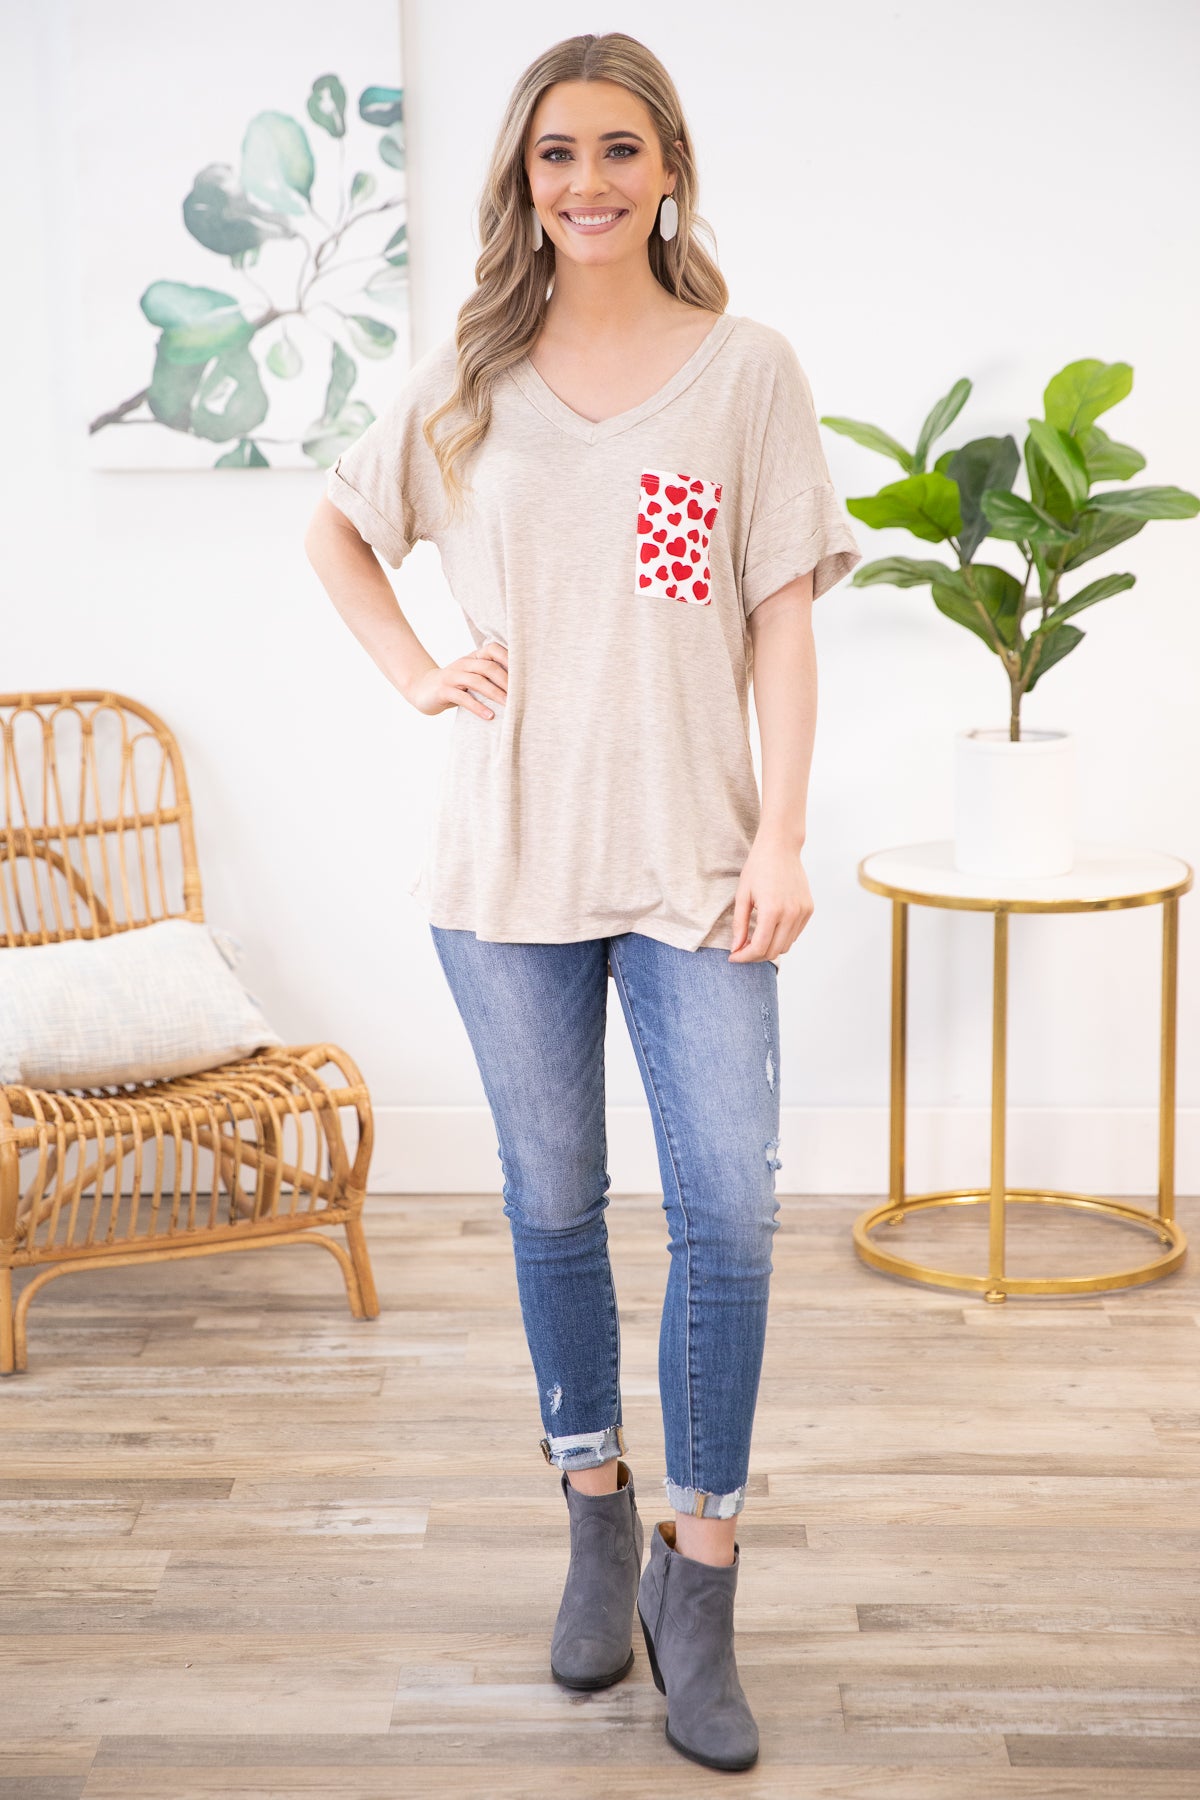 Oatmeal V-Neck Top with Heart Printed Pocket - Filly Flair